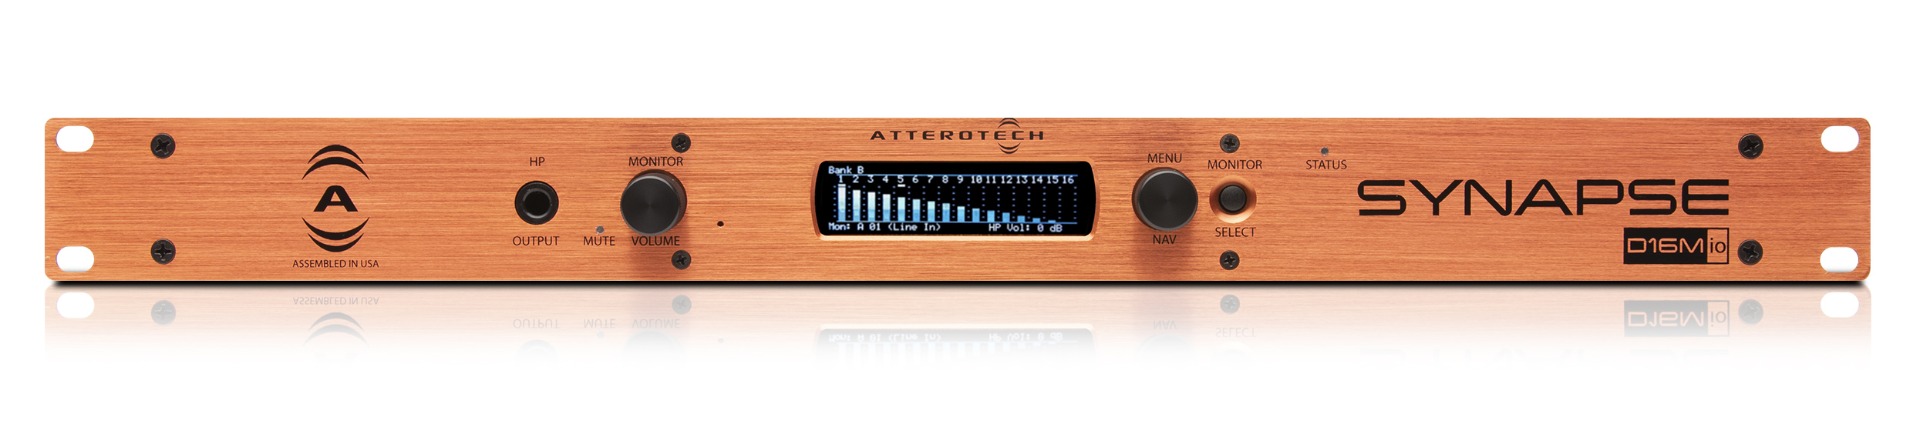 Attero Tech by QSC Synapse D16Mio - Dante/AES67 networked audio interface